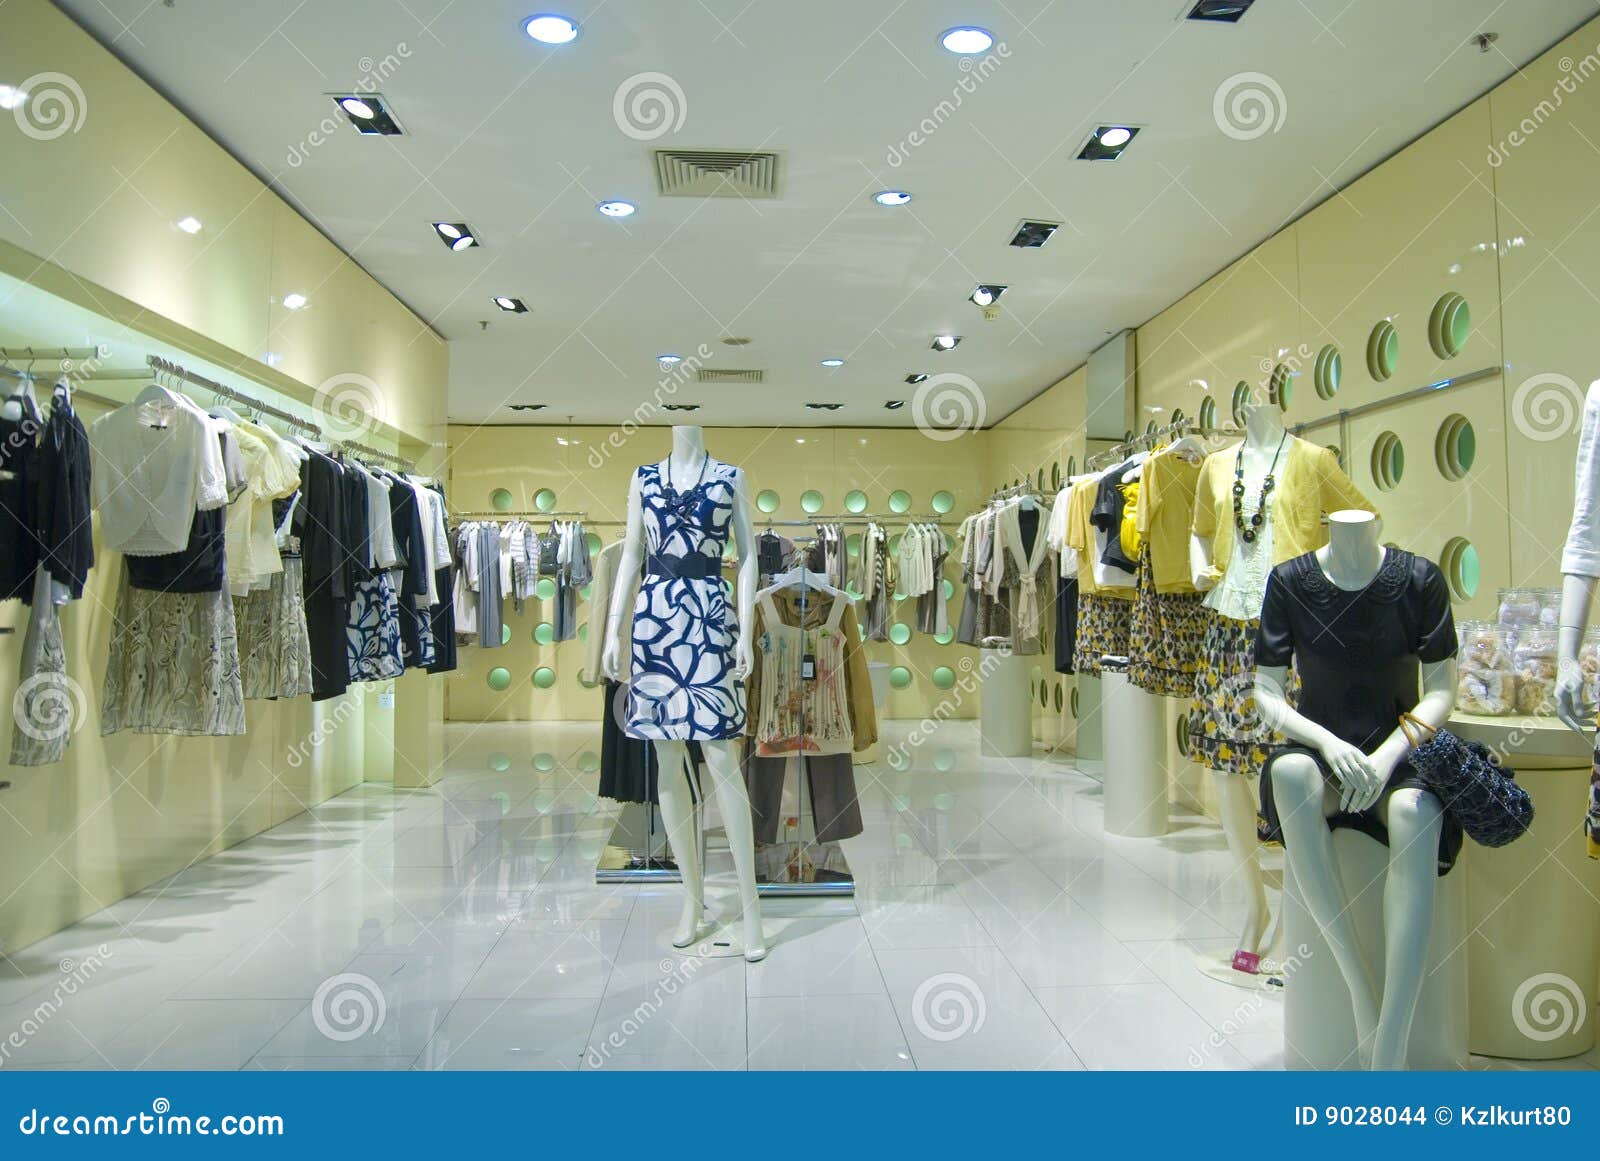 Department store stock photo. Image of mall, buying, imitation - 9028044